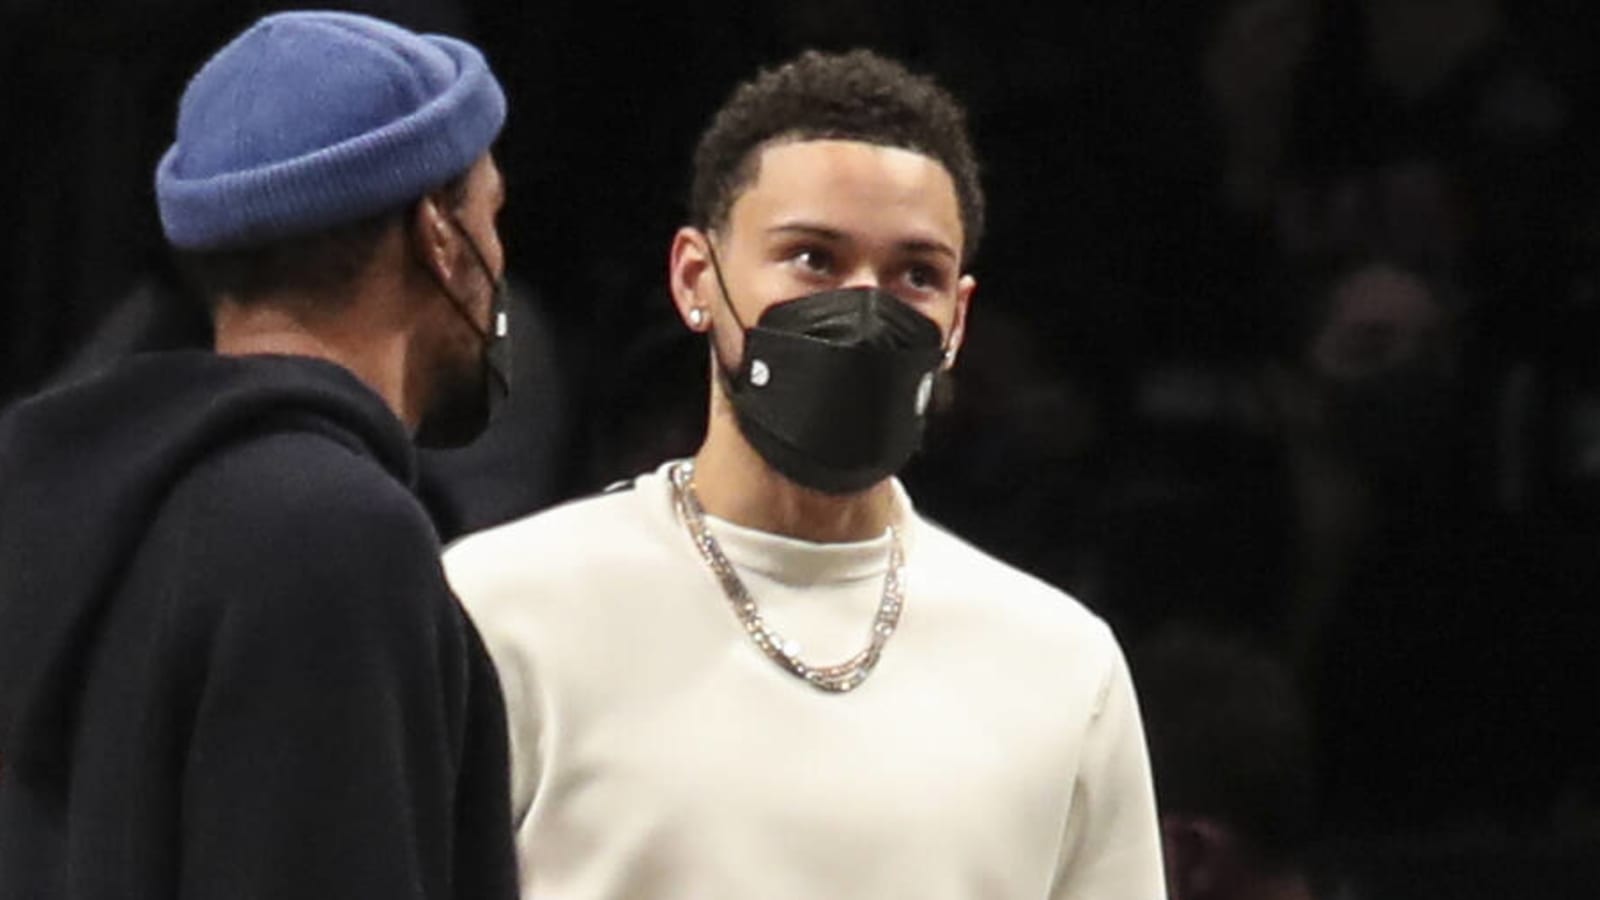 Ben Simmons makes appearance on Nets' bench